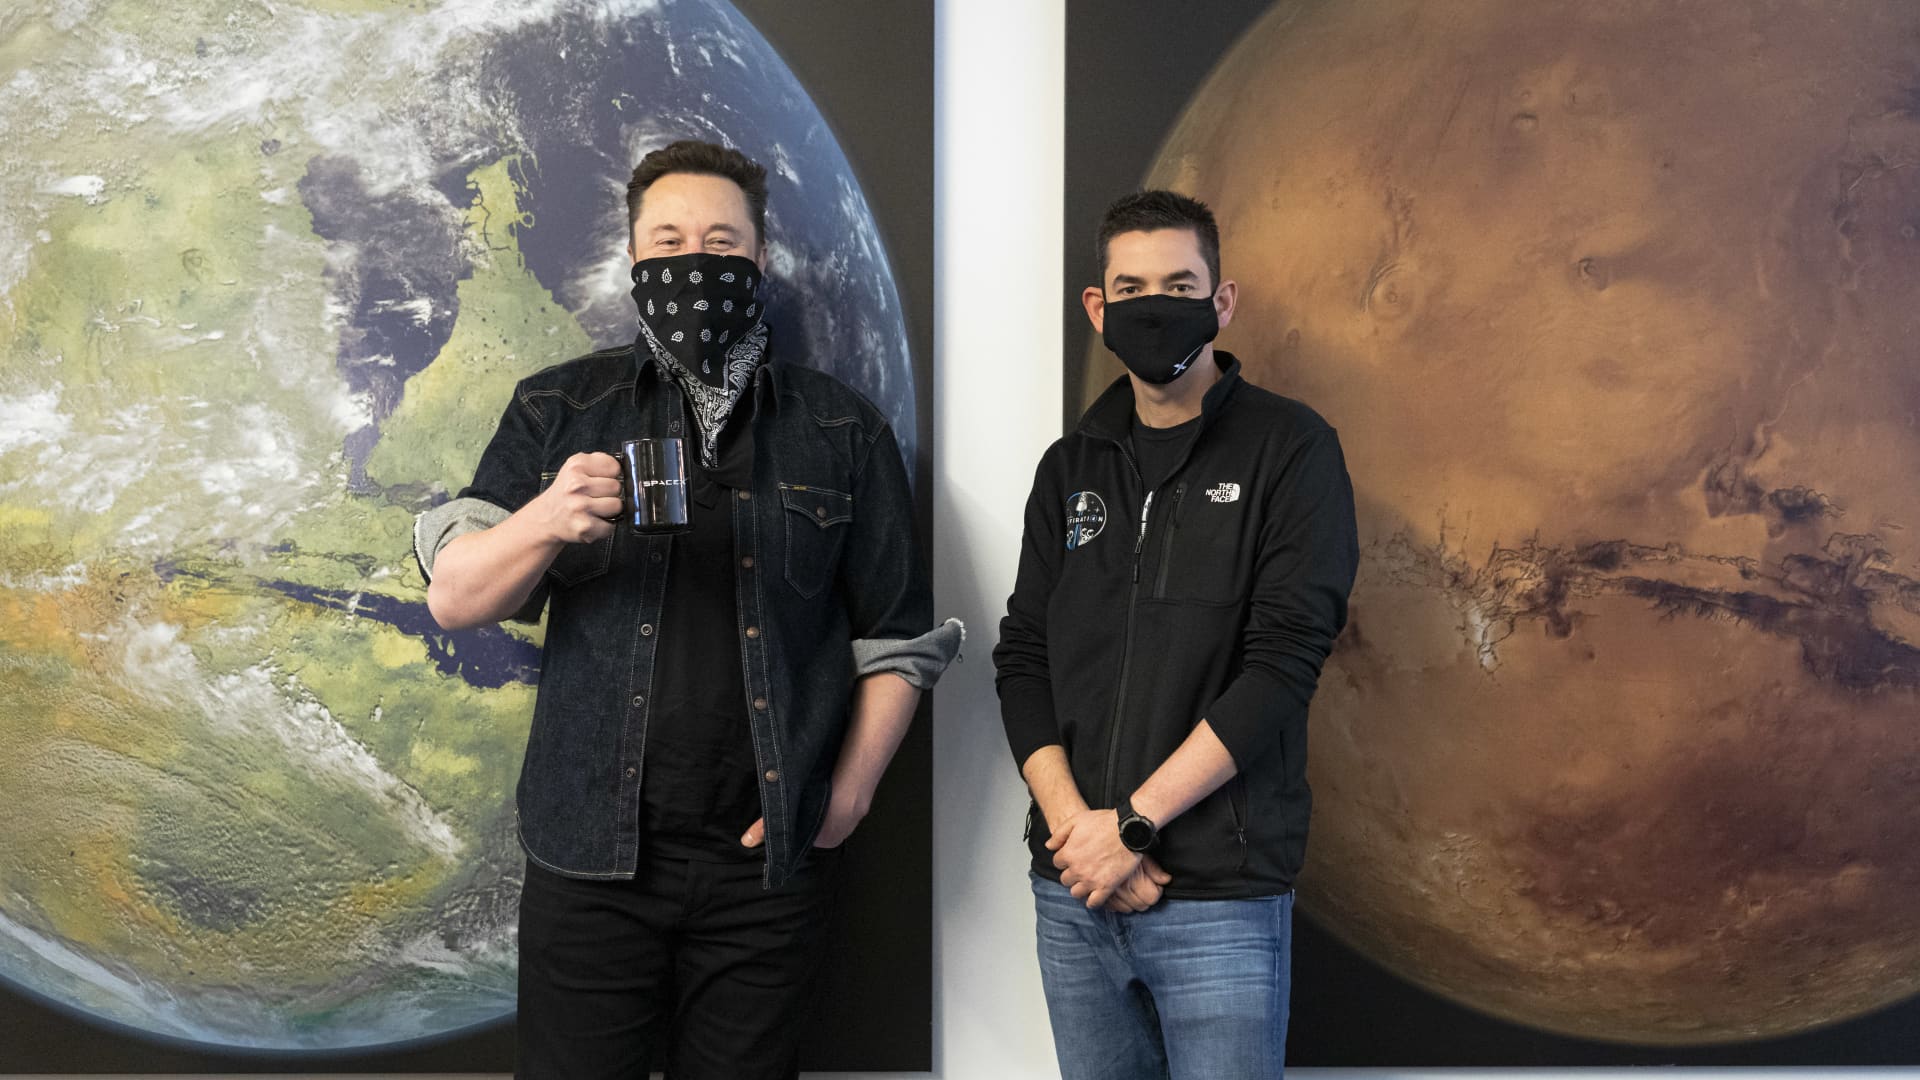 SpaceX CEO Elon Musk and Shift4 Payments CEO Jared Isaacman pose together at SpaceX headquarters in Hawthorne, California to announce the Inspiration4 all-civilian space mission.